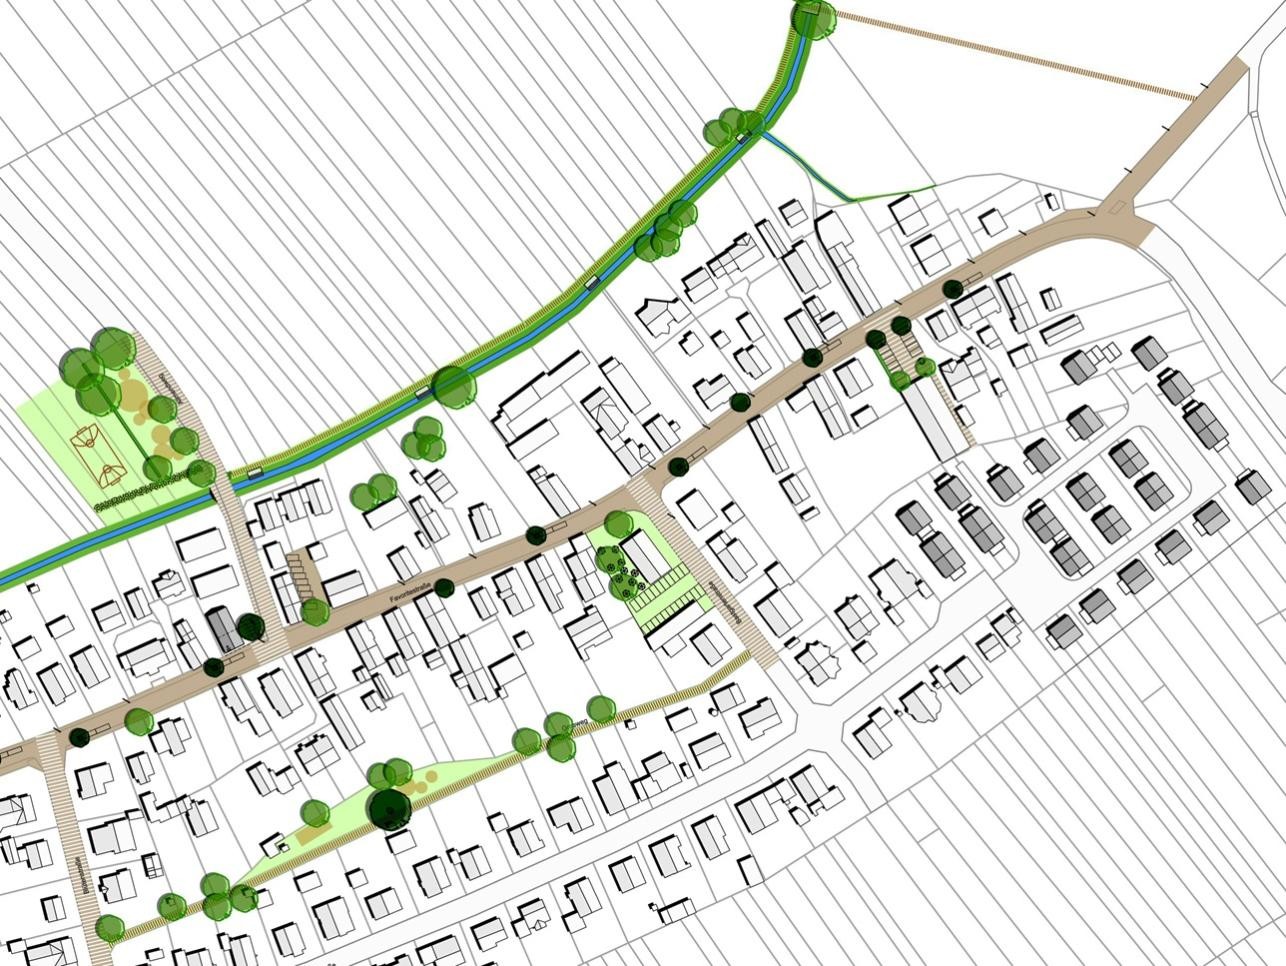 Plan of the new Favoritenstraße in Förch with fields, houses and trees